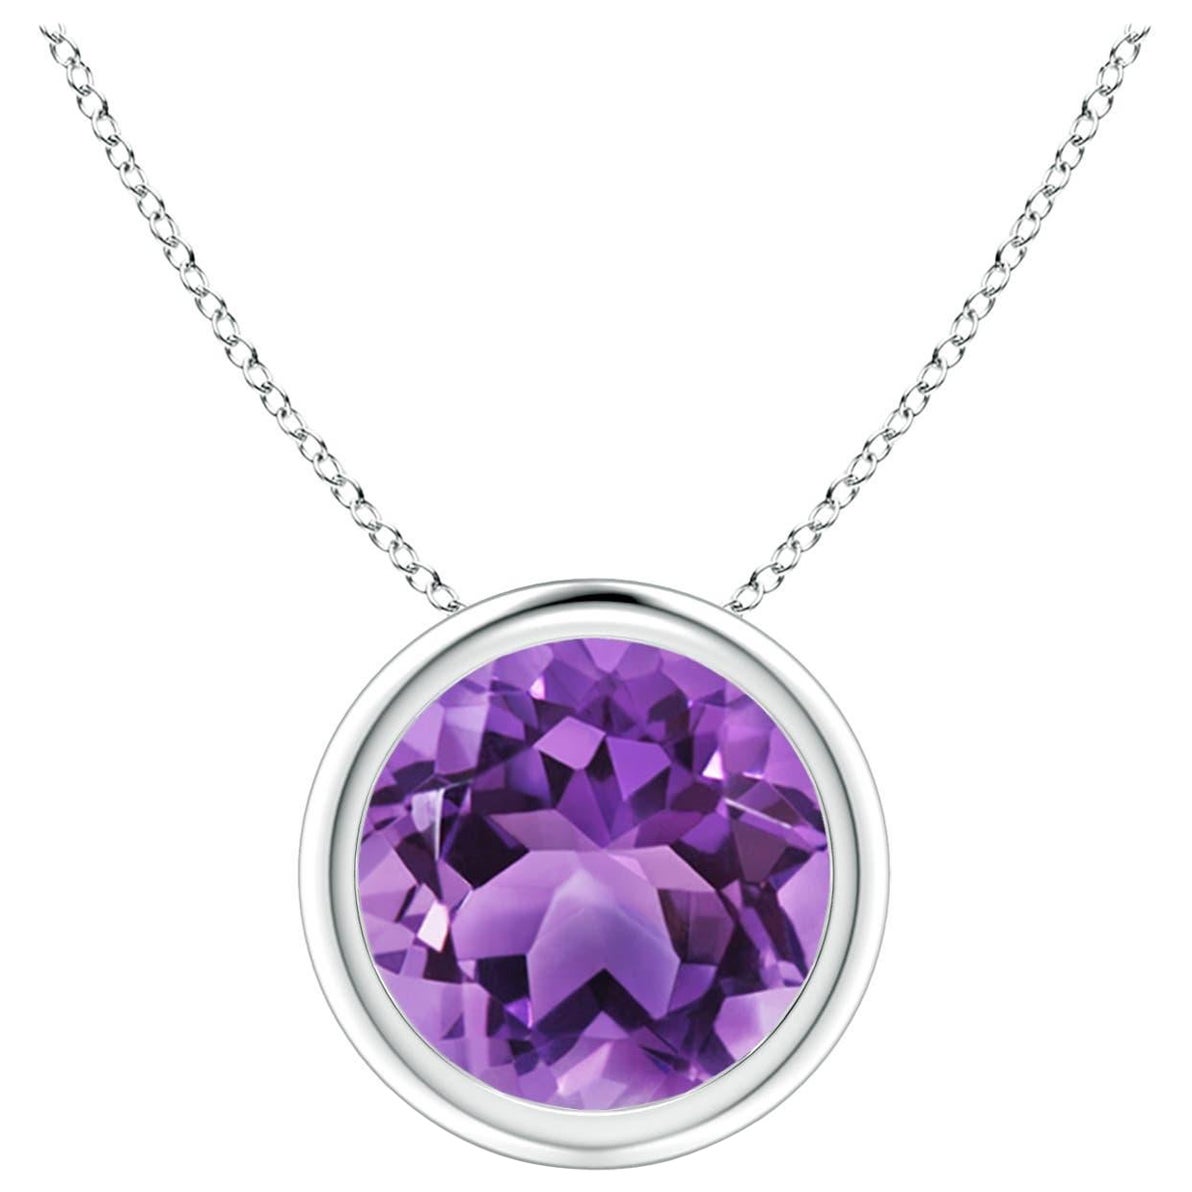 Natural Bezel-Set Round 1.7ct Amethyst Solitaire Pendant in 14K White Gold For Sale